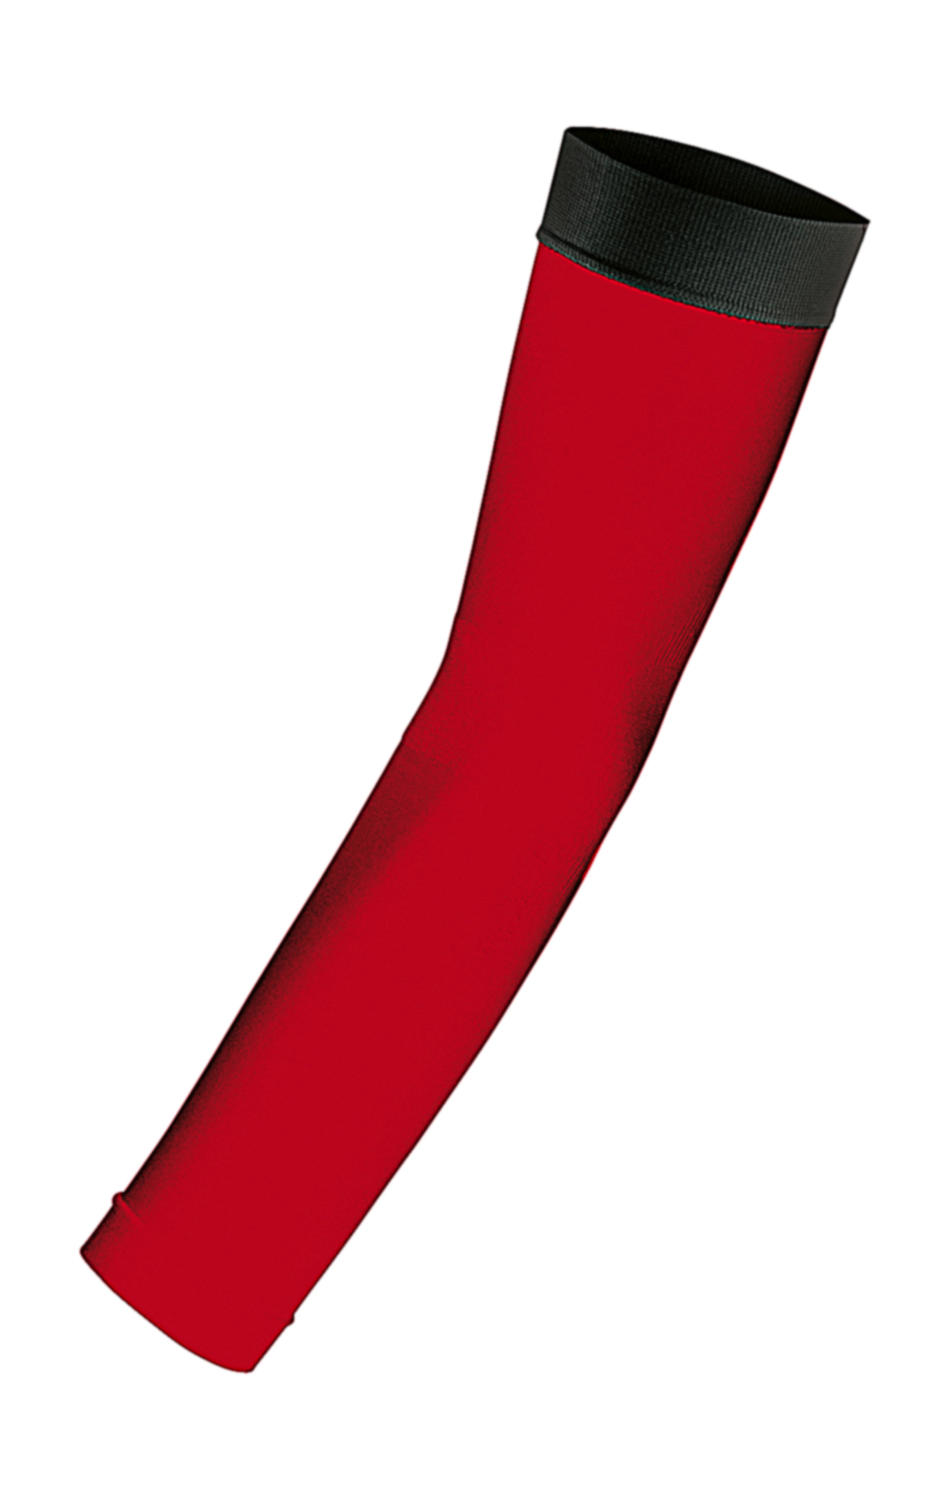  Compression Arm Sleeve in Farbe Red/Black